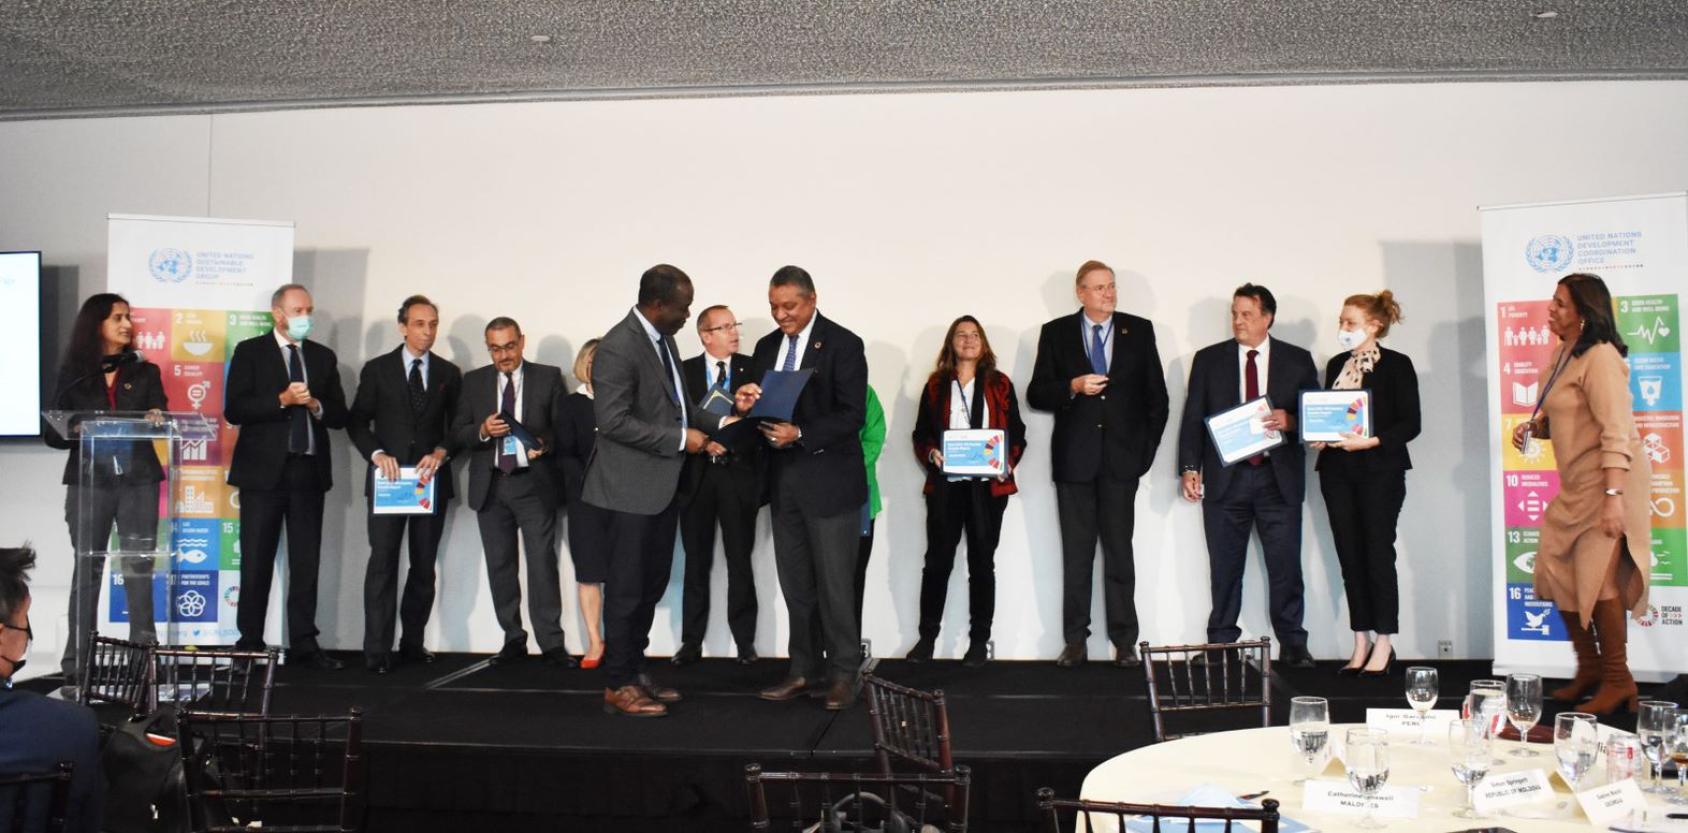 A group of people in formal attire on a stage during the UN Team Annual Results Reports Awards ceremony.